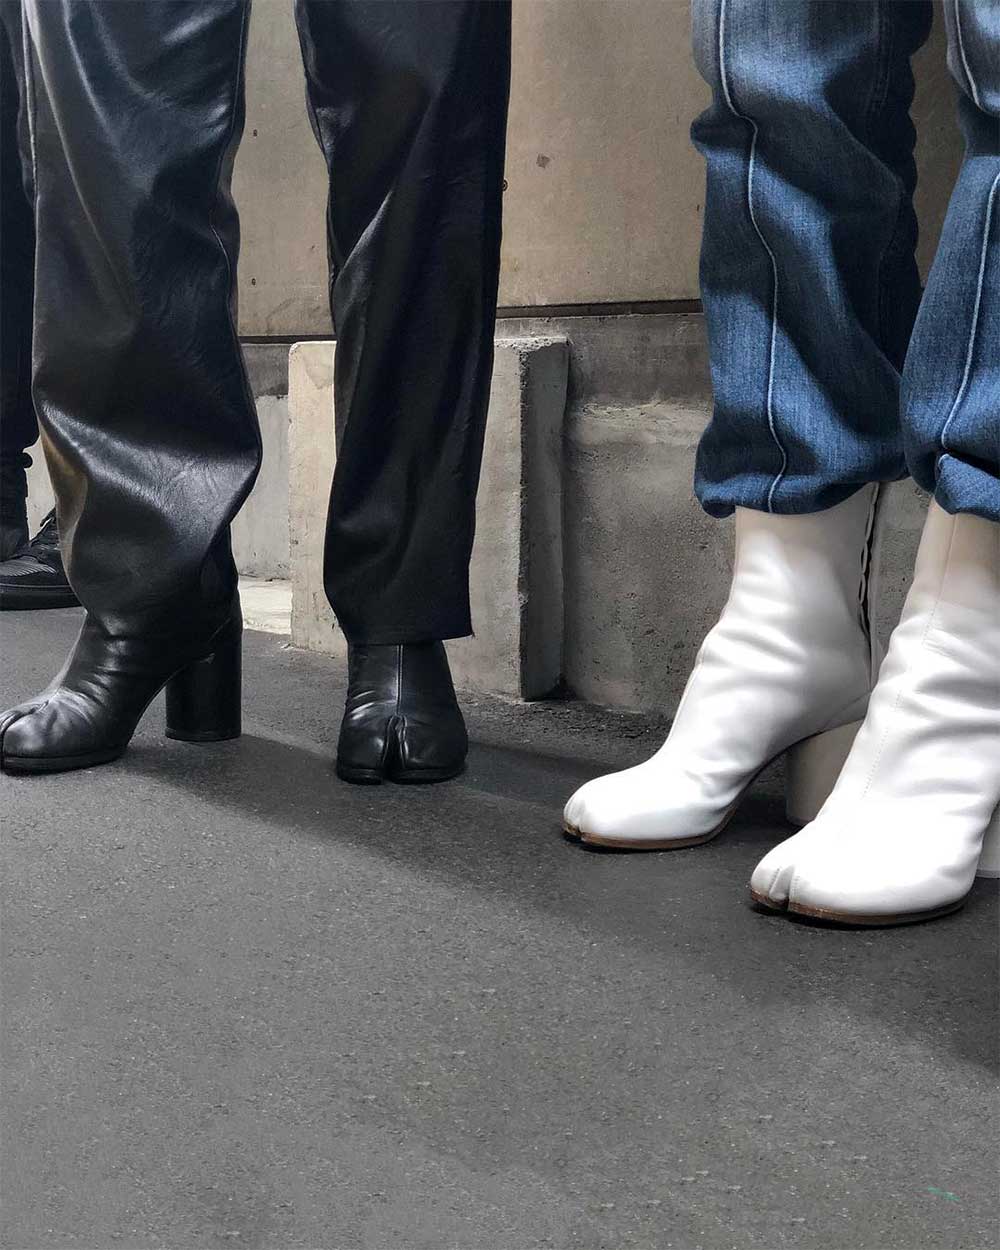 Japanese Square-Toe Boots